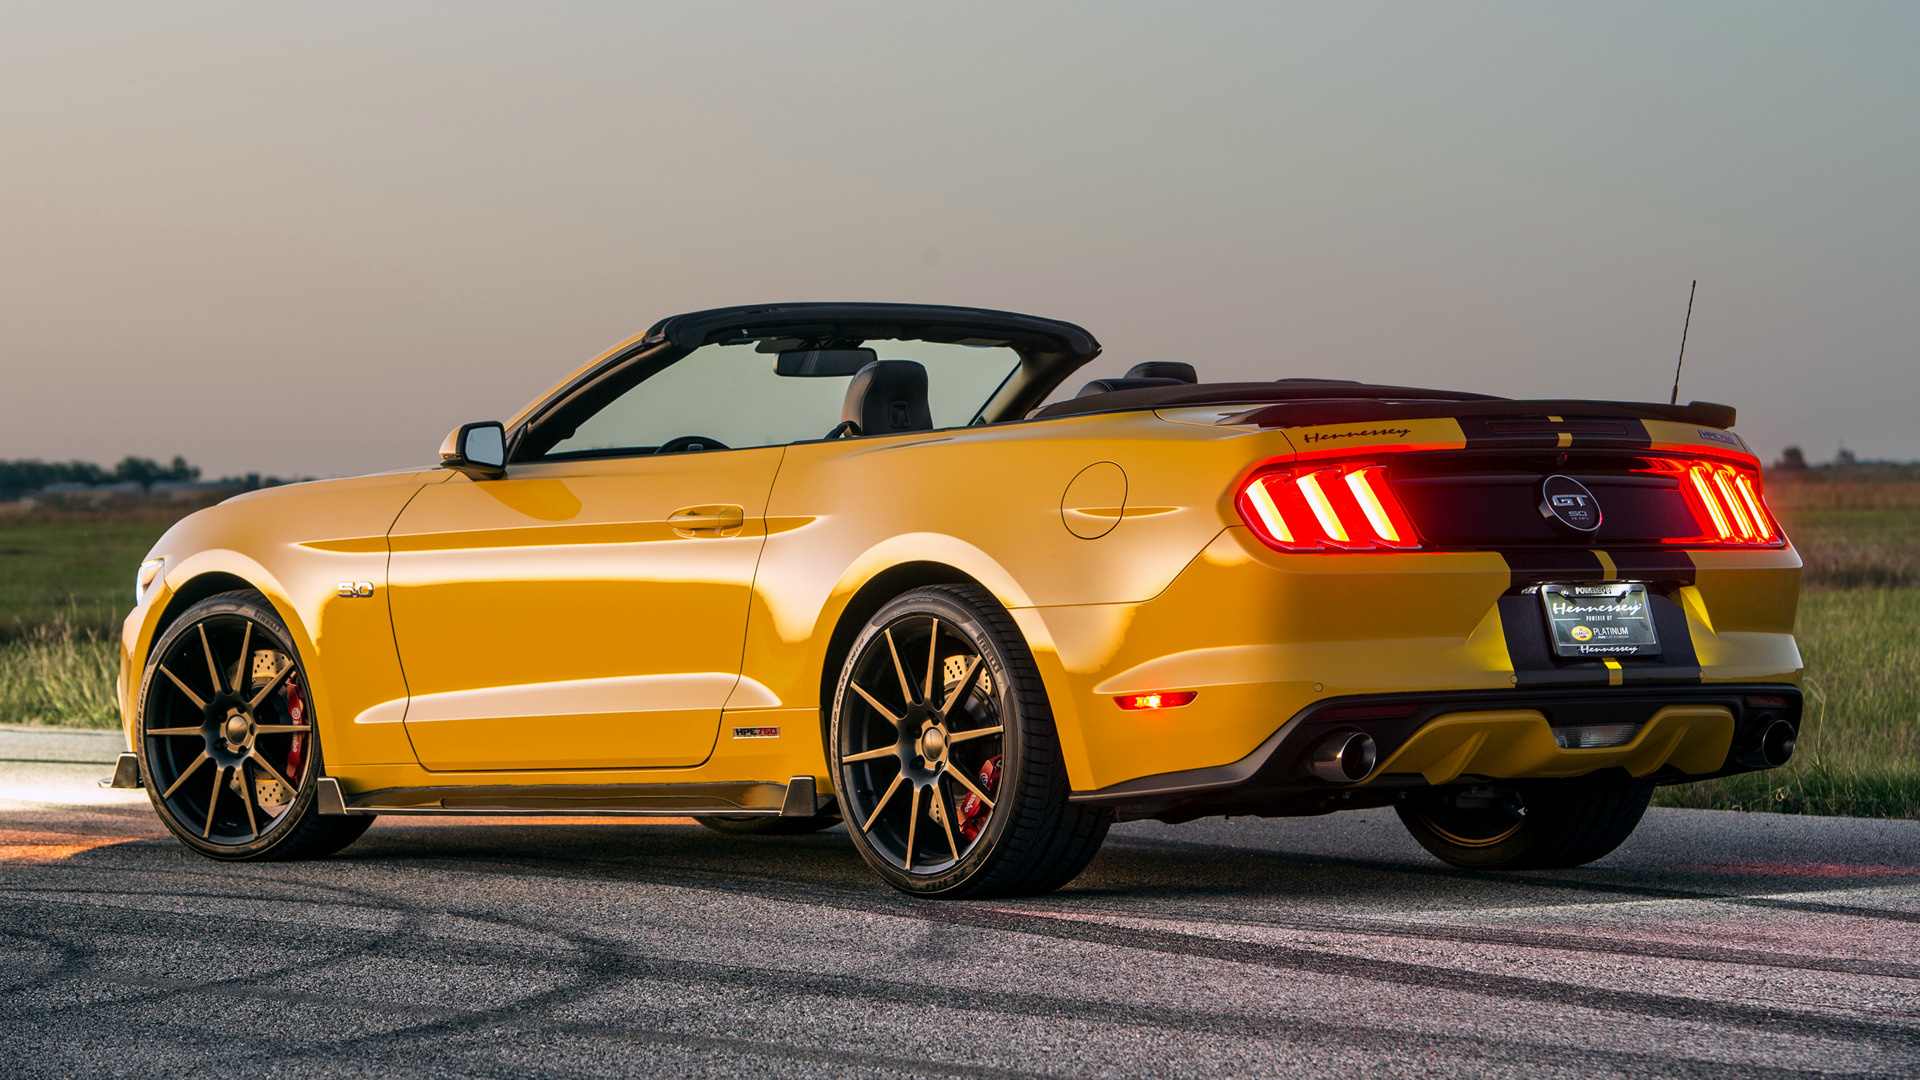 Car Convertible Hennessey Mustang Gt Muscle Car Tuning Yellow Car 1920x1080